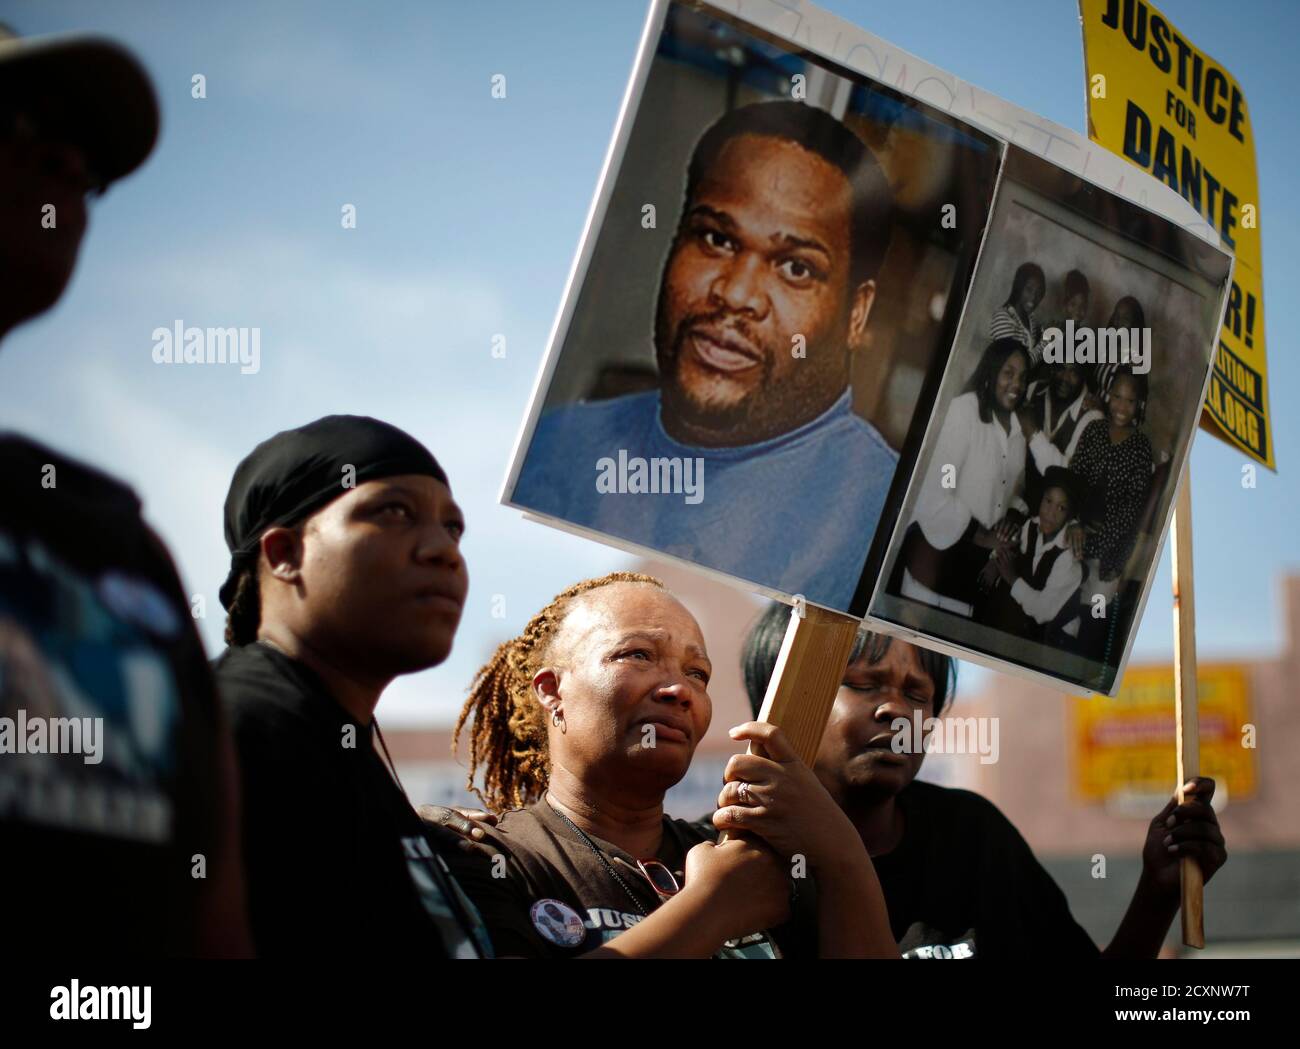 Delora McCoy (C), mother of Dante Parker, who died in San Bernardino Sheriff's custody, and his sisters Erica Fuller (L) and Makeba James march during the National Day of Protest to Stop Police Brutality in Los Angeles October 22, 2014. REUTERS/Lucy Nicholson (UNITED STATES - Tags: POLITICS CIVIL UNREST CRIME LAW) Stock Photo